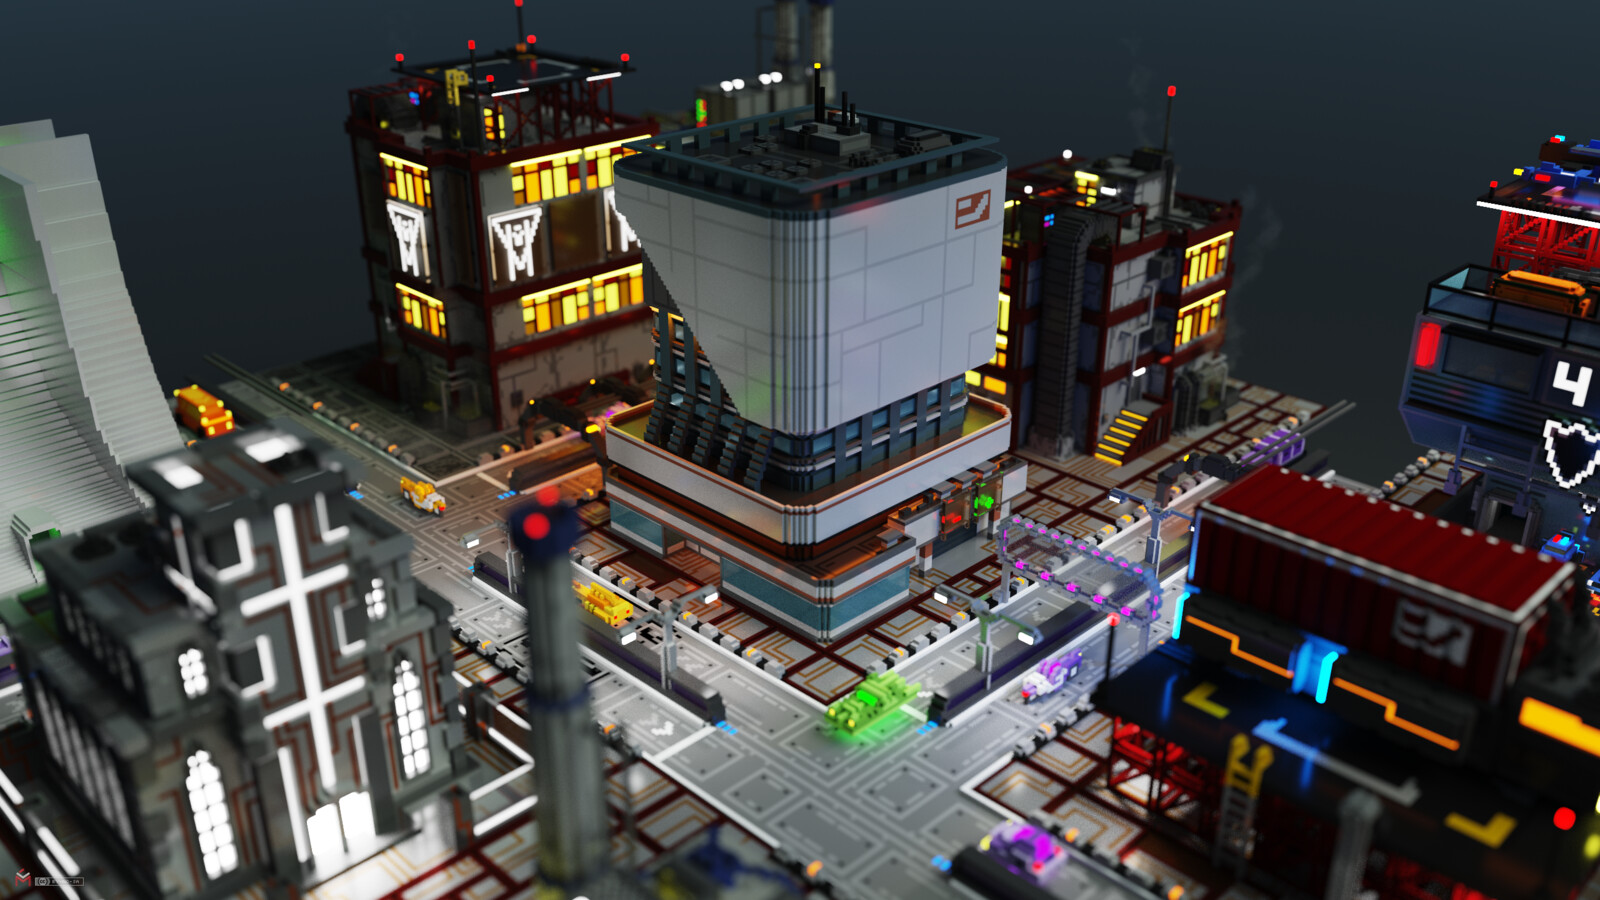 "AC Relay" among additional models by Muerto_ni, StarVox and Starvick, licensed under CC BY-NC-SA 4.0
MagicaVoxel render - february 2020